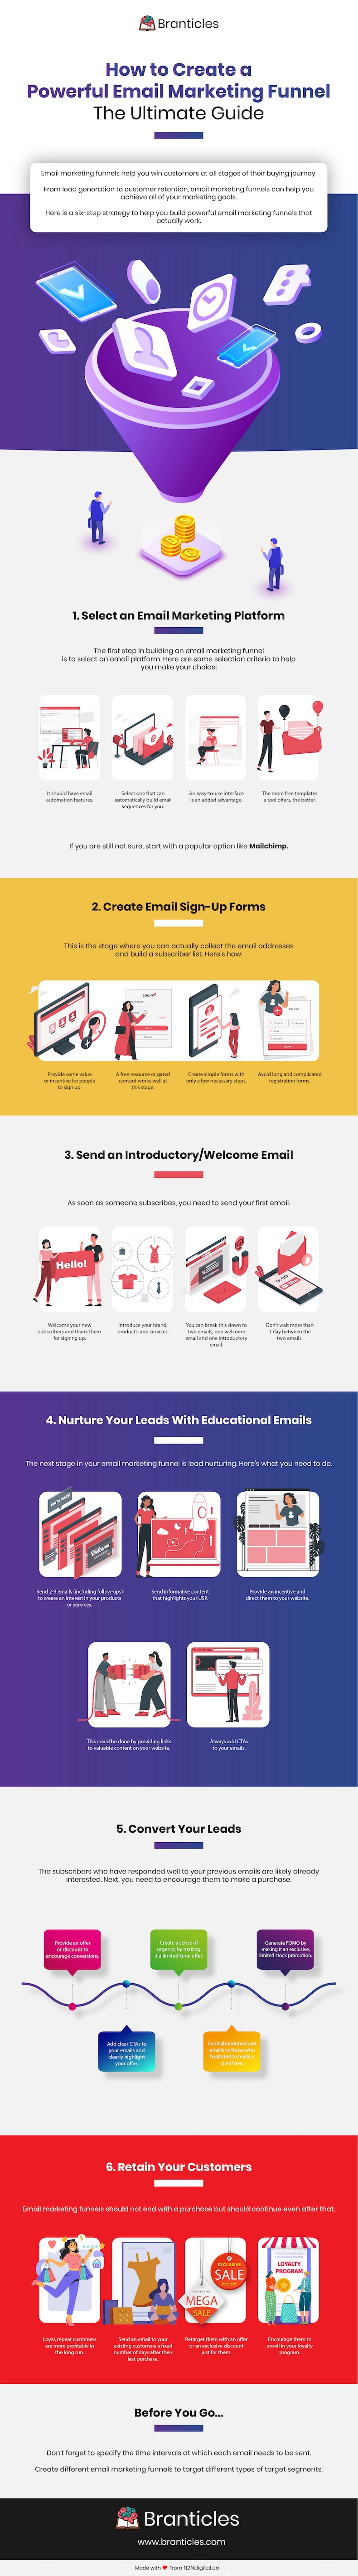 How to create a powerful email marketing funnel infographic